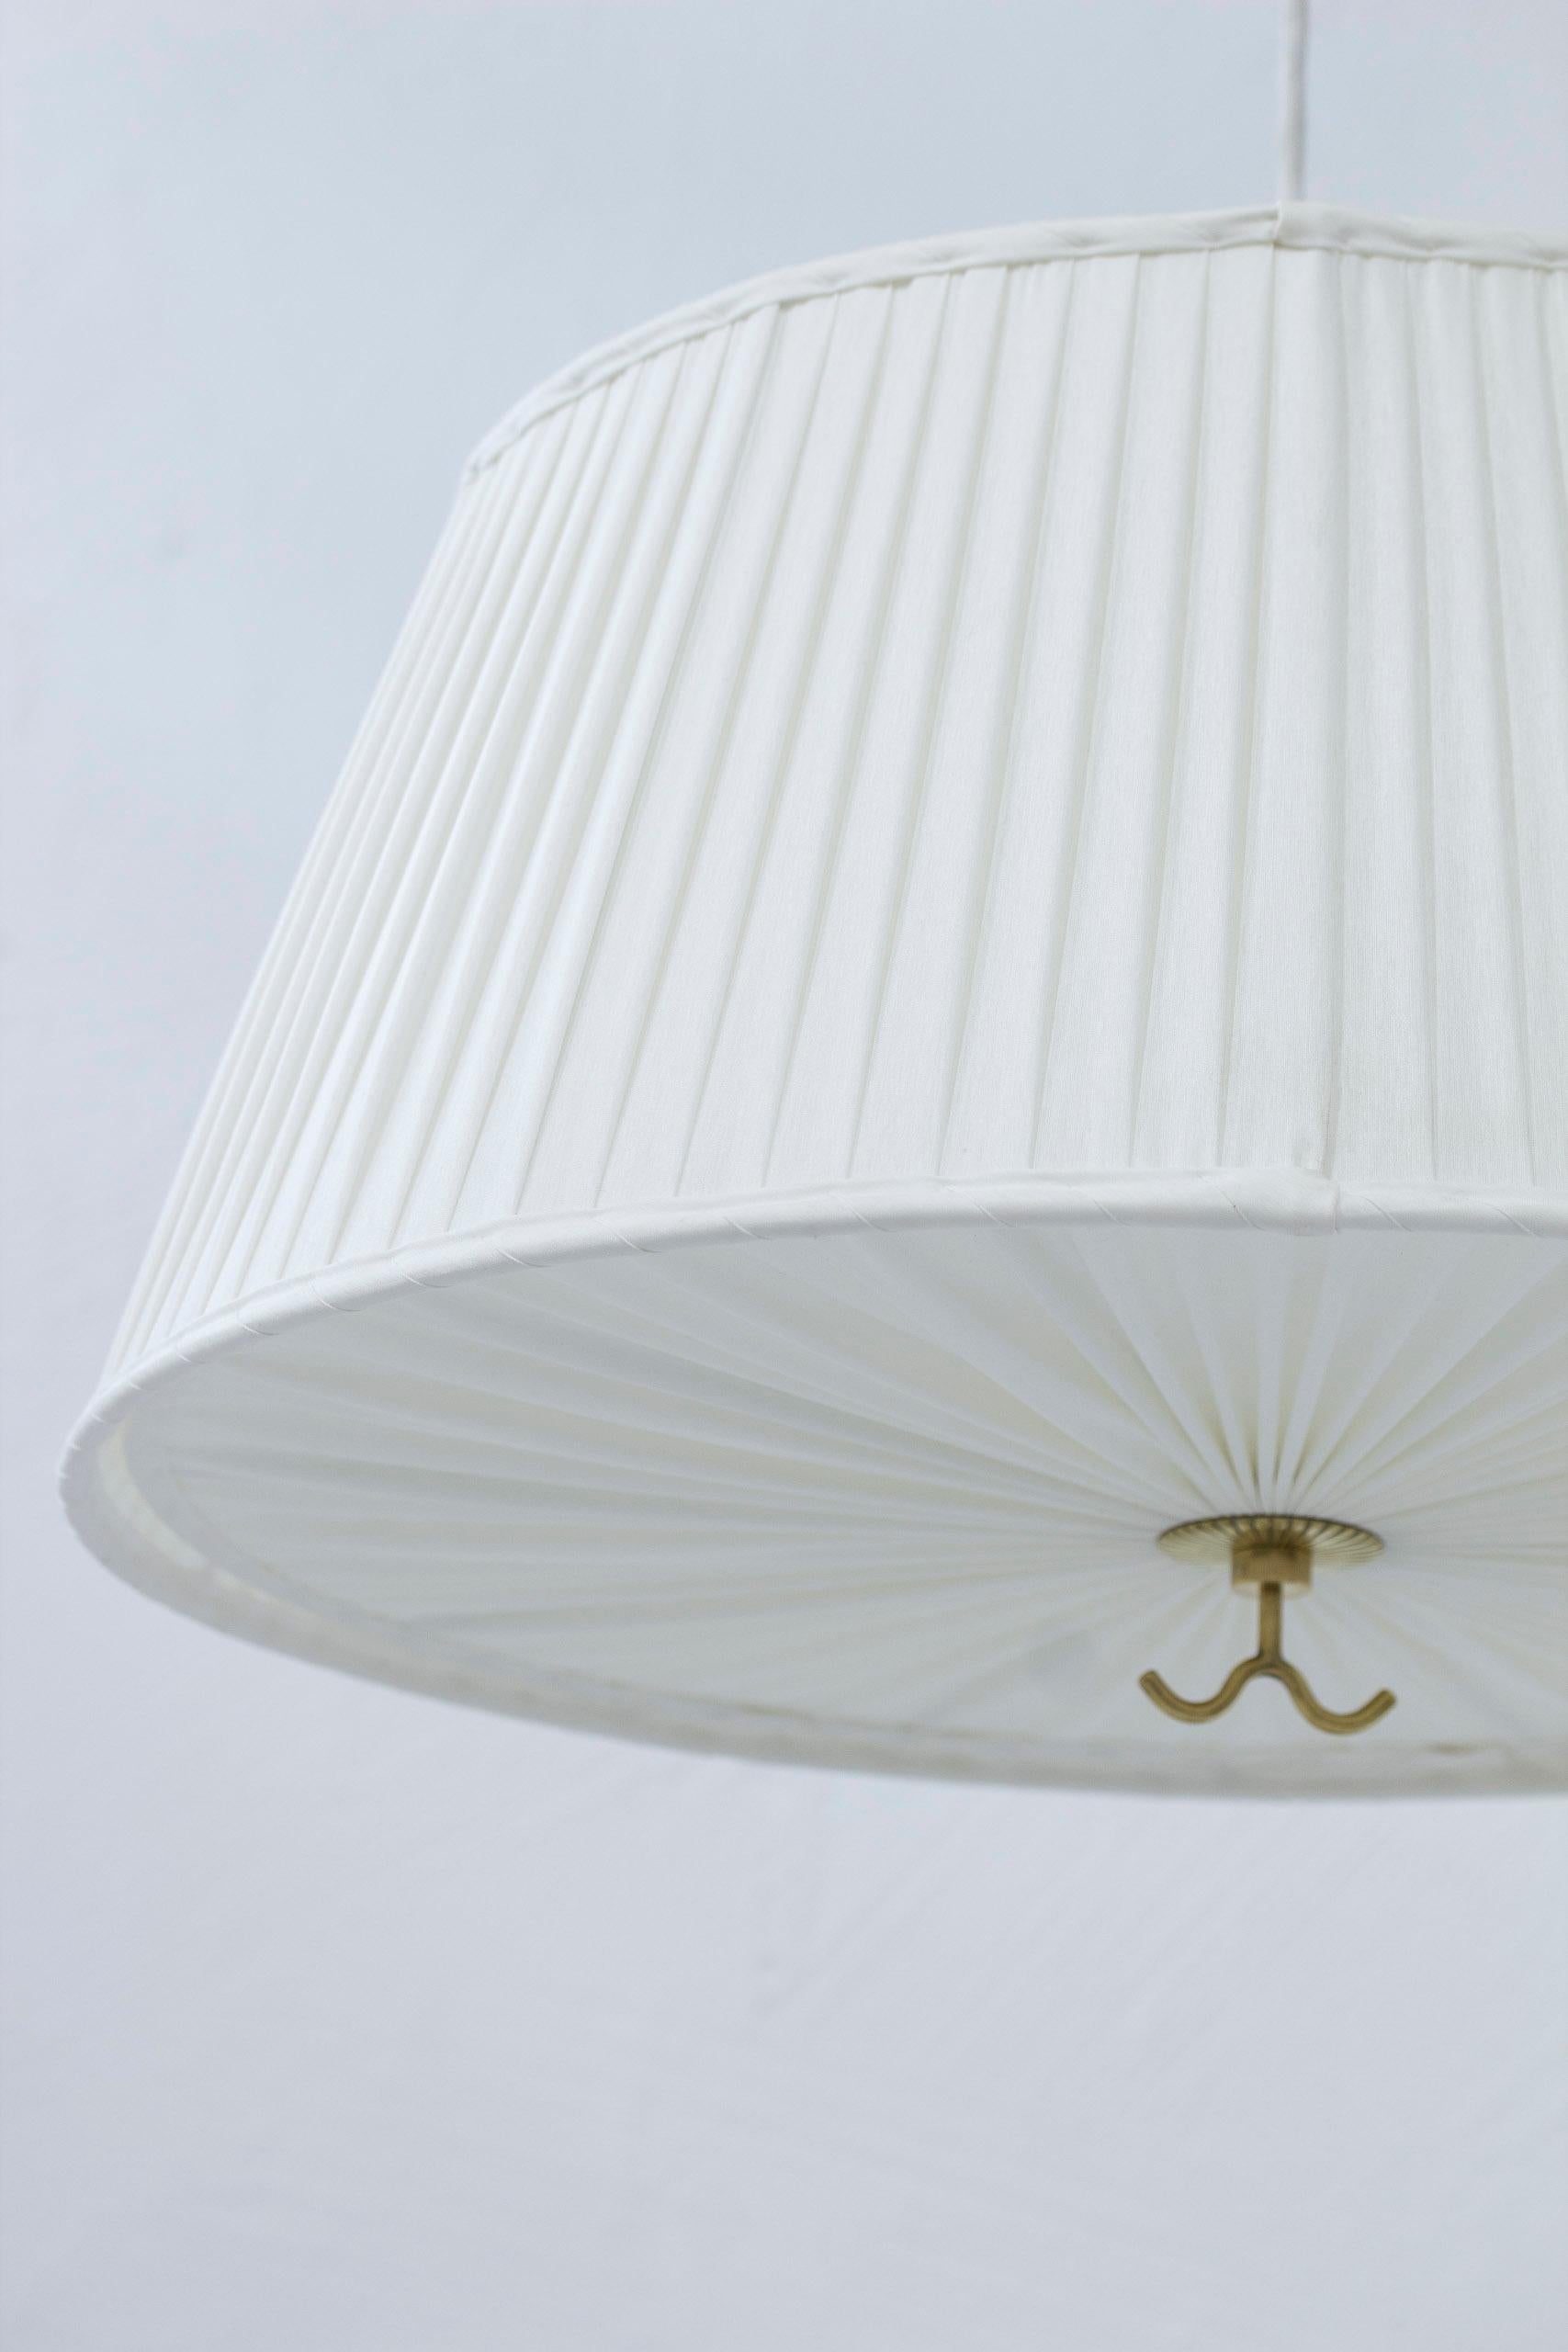 Swedish Brass and Pleated Fabric Ceiling Lamp 11558 by Harald Notini, Böhlmarks, Sweden